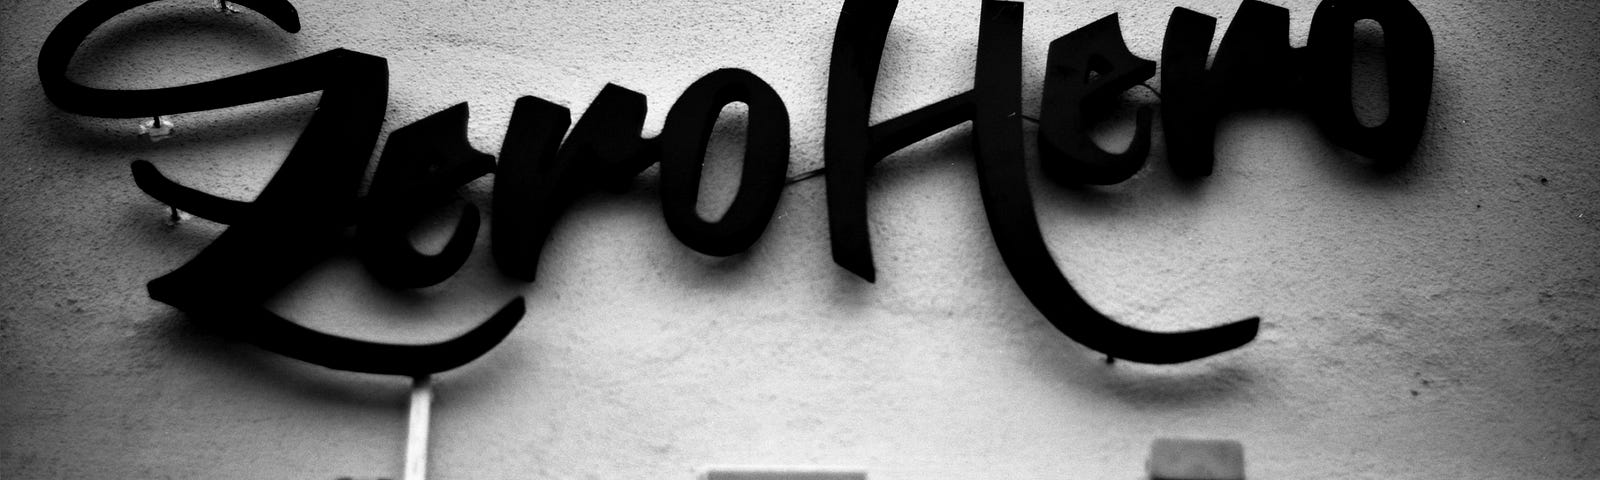 WRITING TIPS AND TRICKS Dear Writer, You Really Do Not Have to Worry When You Get Zero Claps for Your Stories There are six zeros in a million. The Image shows the words ZERO HERO in black script on what looks like a wall. It is a black and white image with the words written in black.